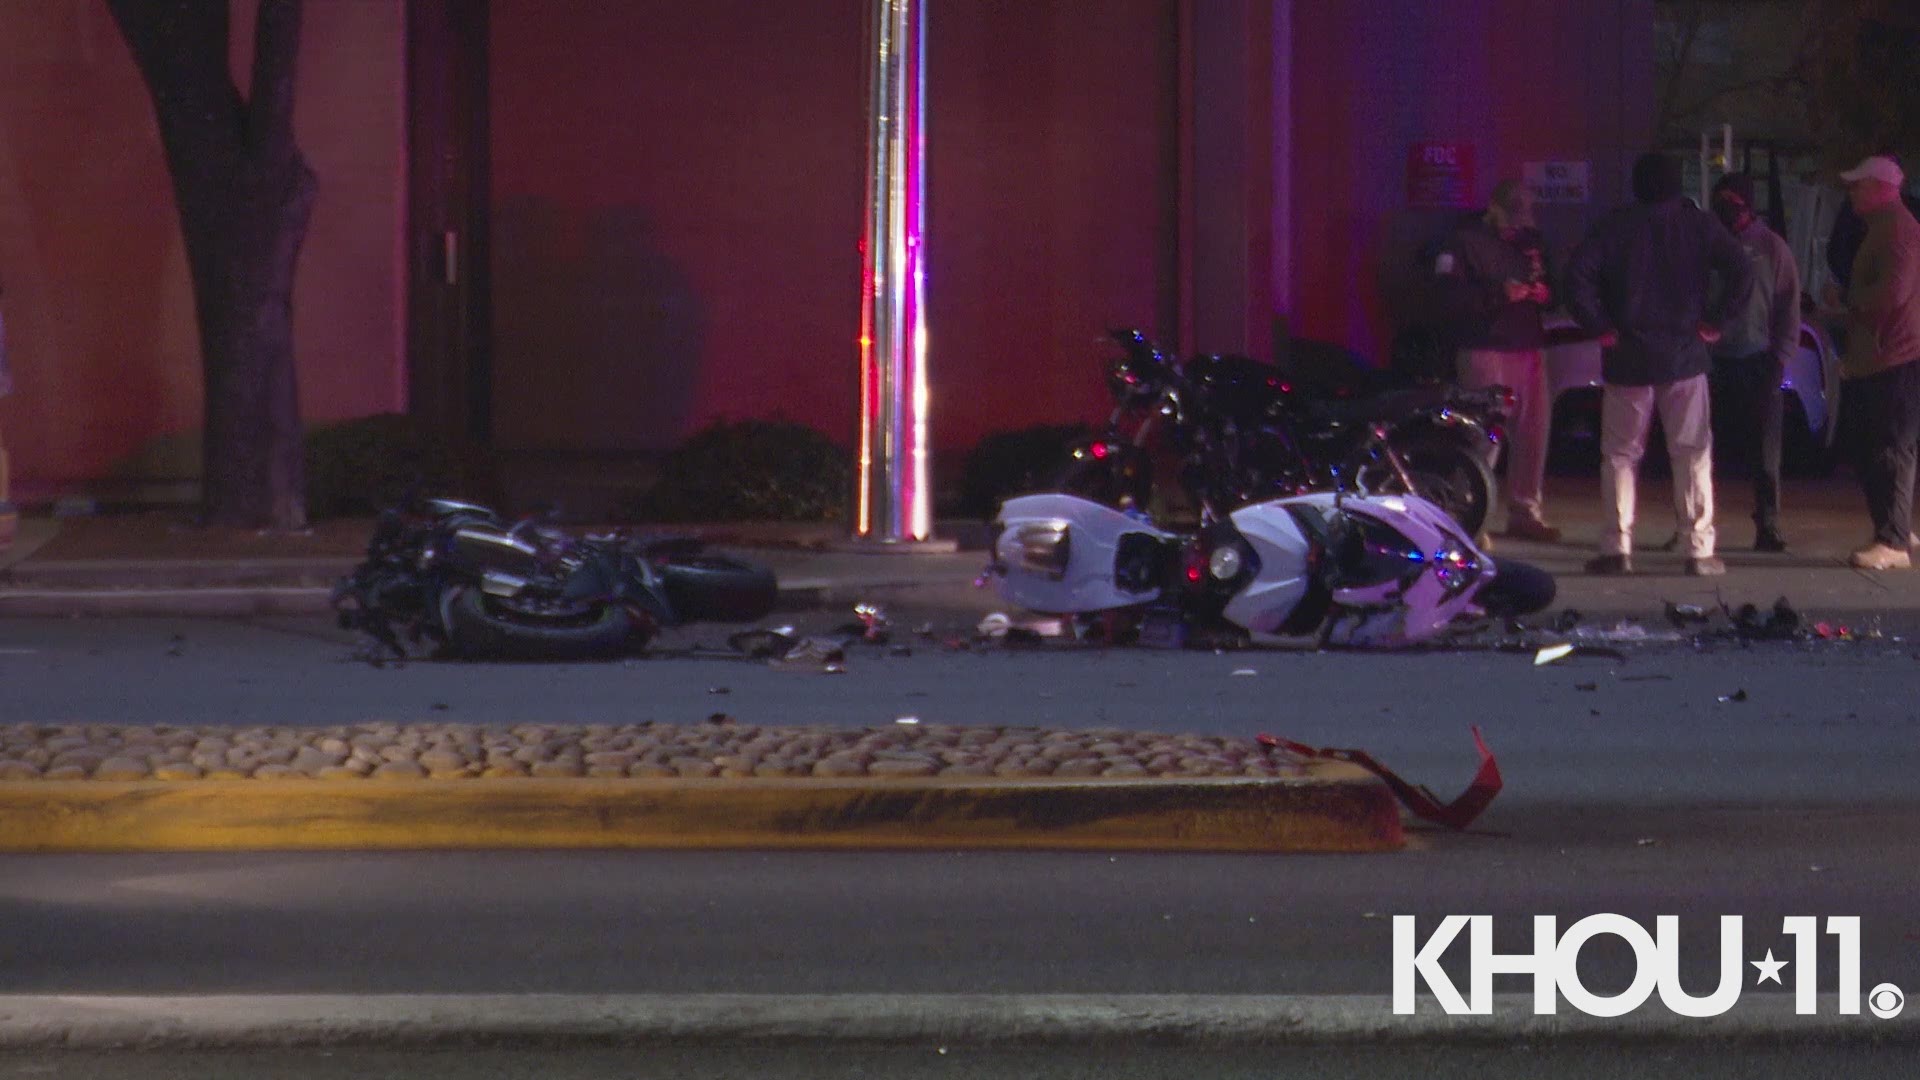 Houston Police are investigating a deadly accident involving four motorcyclists and a taxicab driver in the Galleria area.